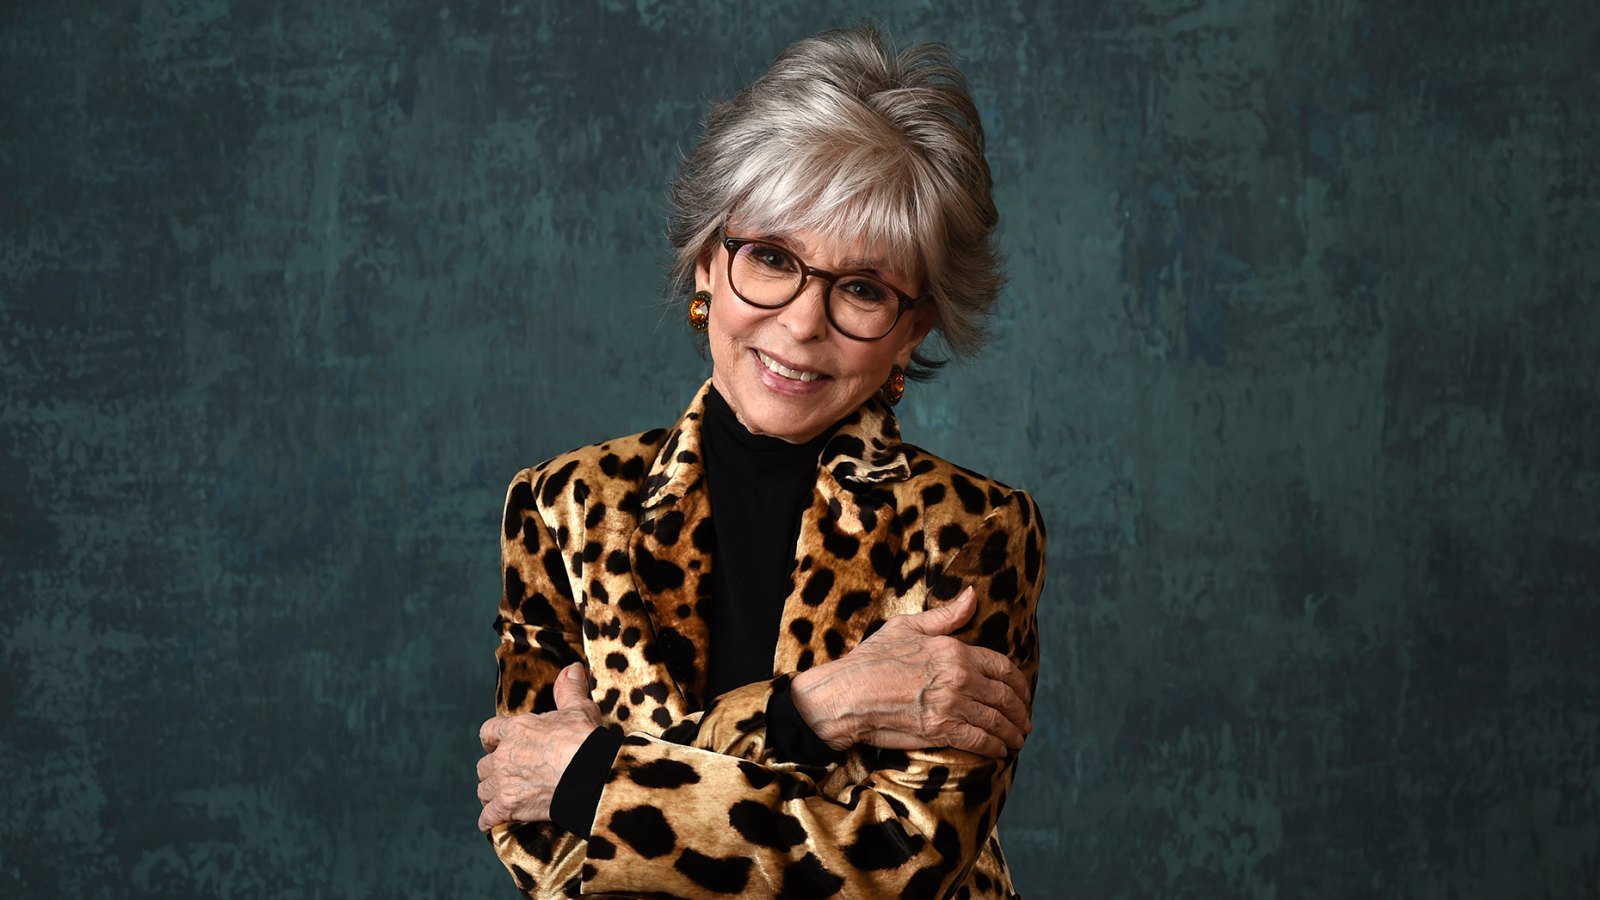 Rita Moreno Talks Surreal Experience Returning to 'West Side Story'